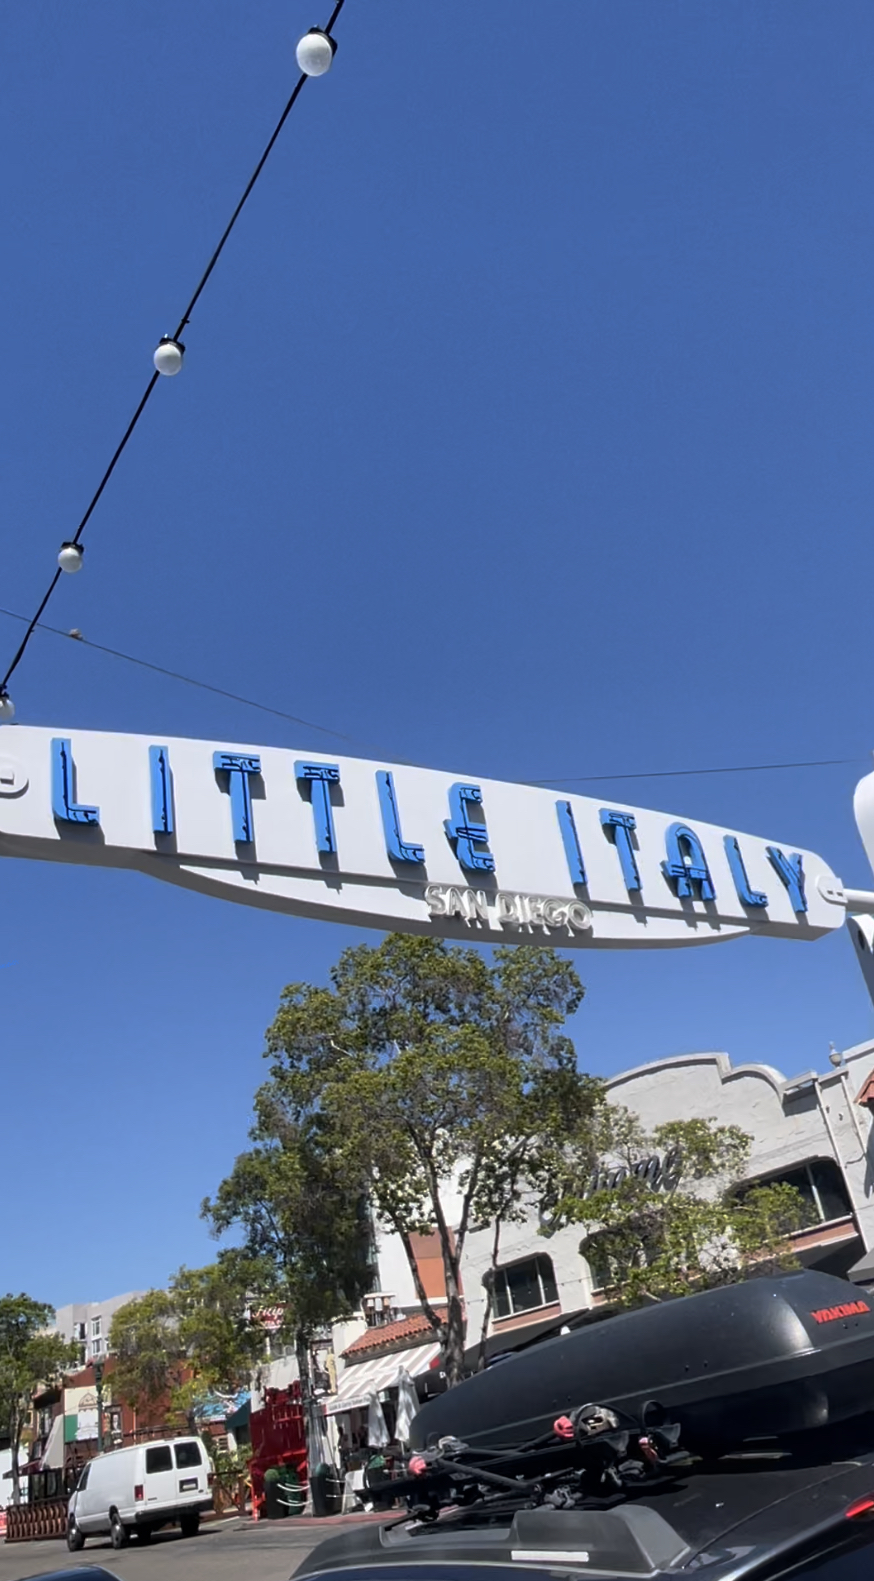 San Diego’s Little Italy is worthy of a visit